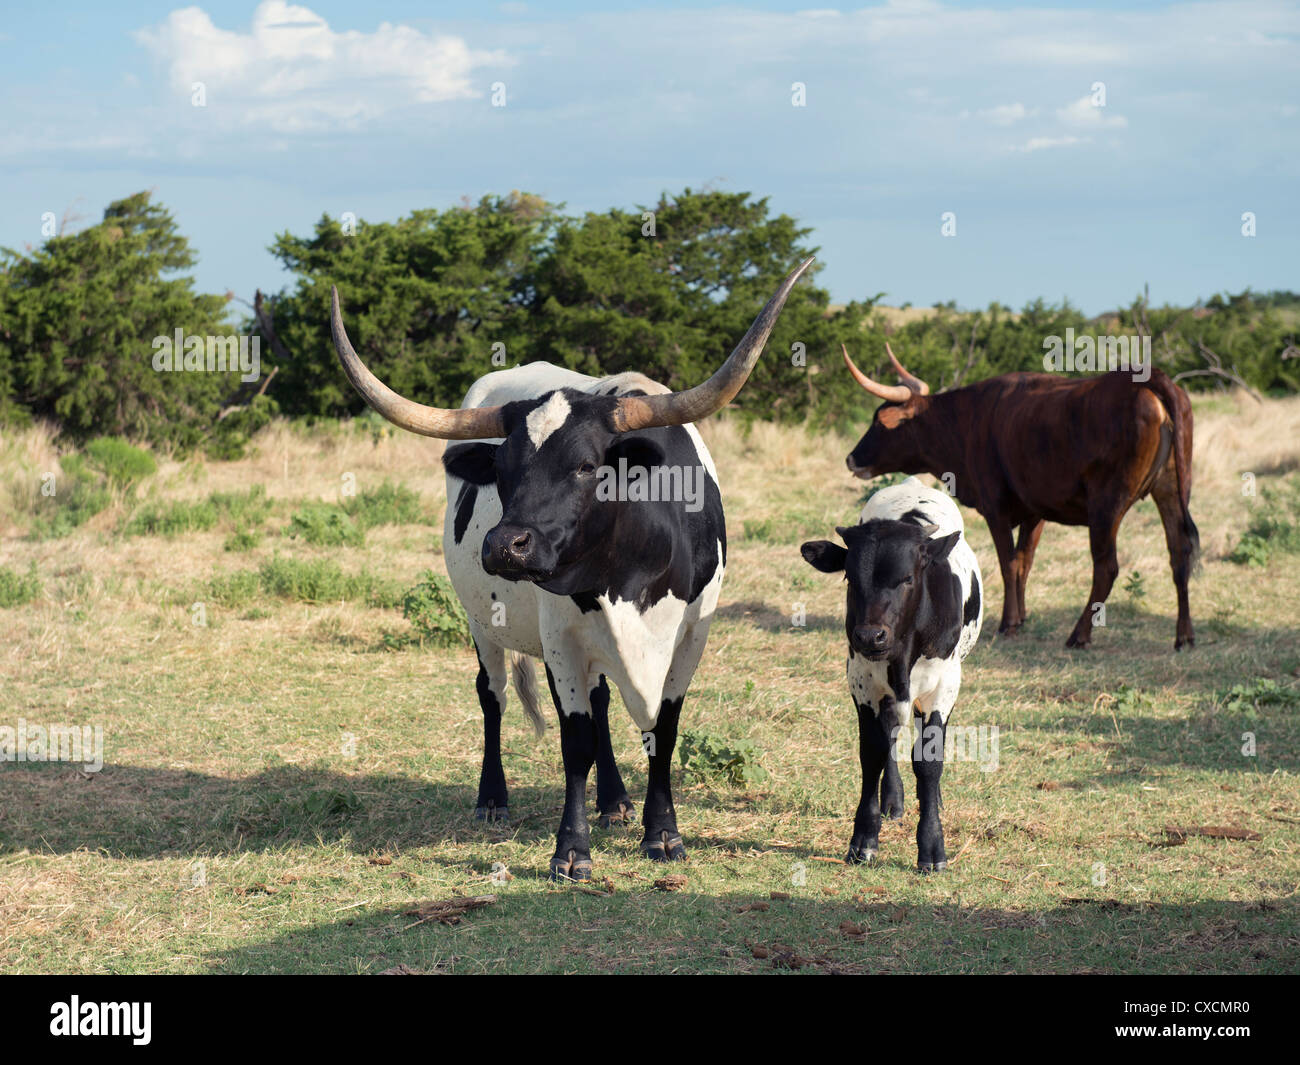 A Texas Longhorn cow, Bos bos, with calf at her side, and another cow behind her. Stock Photo